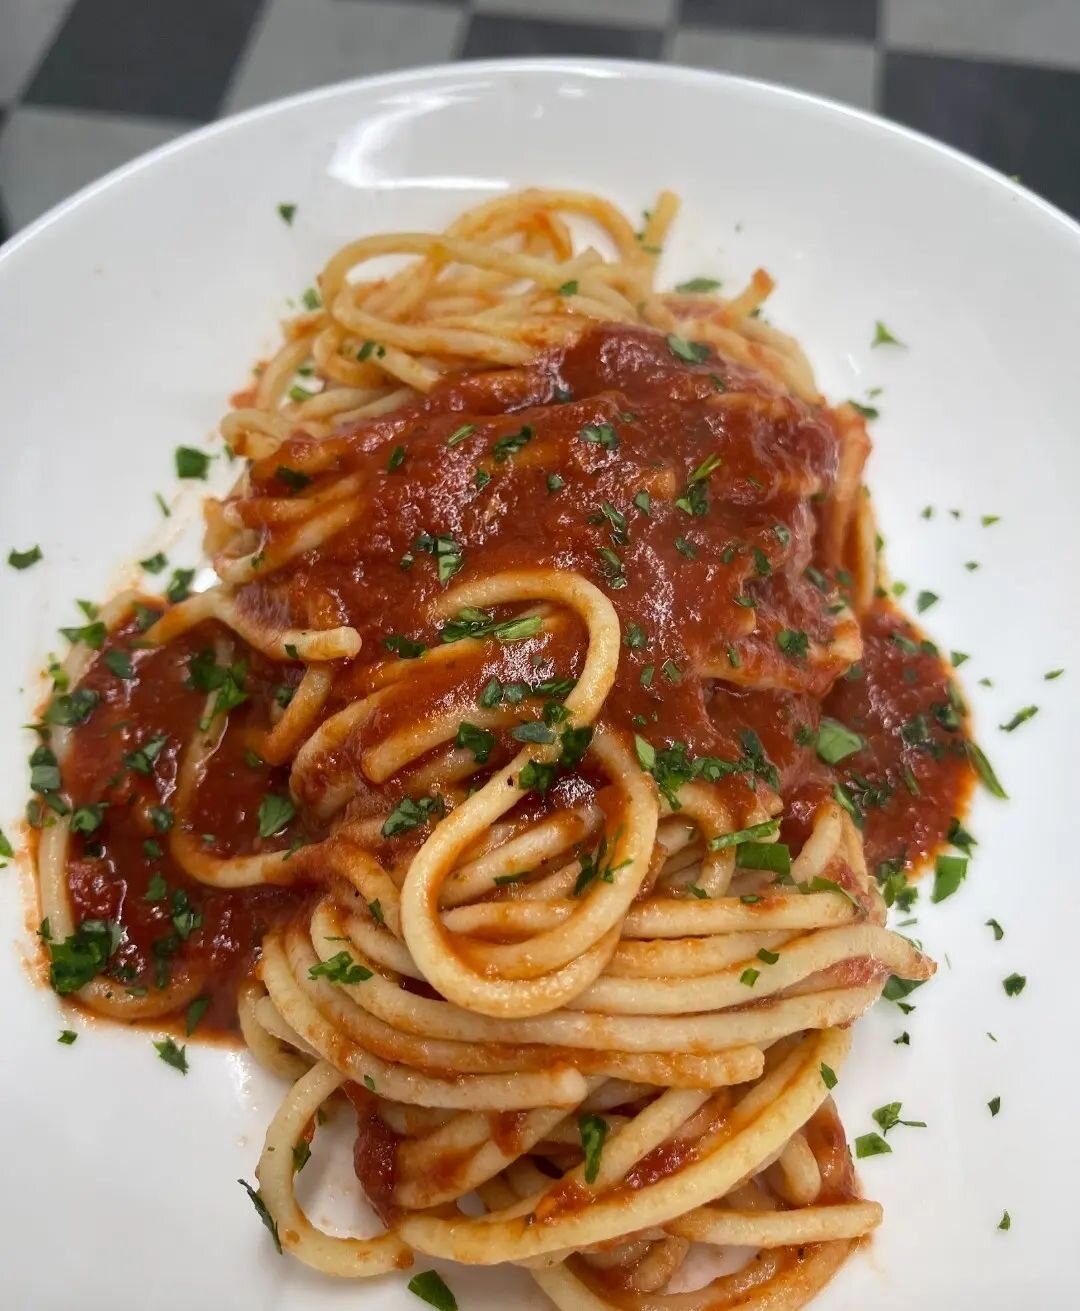 Yesterday was national spaghetti day! 🍝 celebrate with us tonight and enjoy any of our homemade pastas 🤤 take out and dine in available. Happy hour 5pm-6pm. 

💻: @resy 
📞: (315) 789-1629